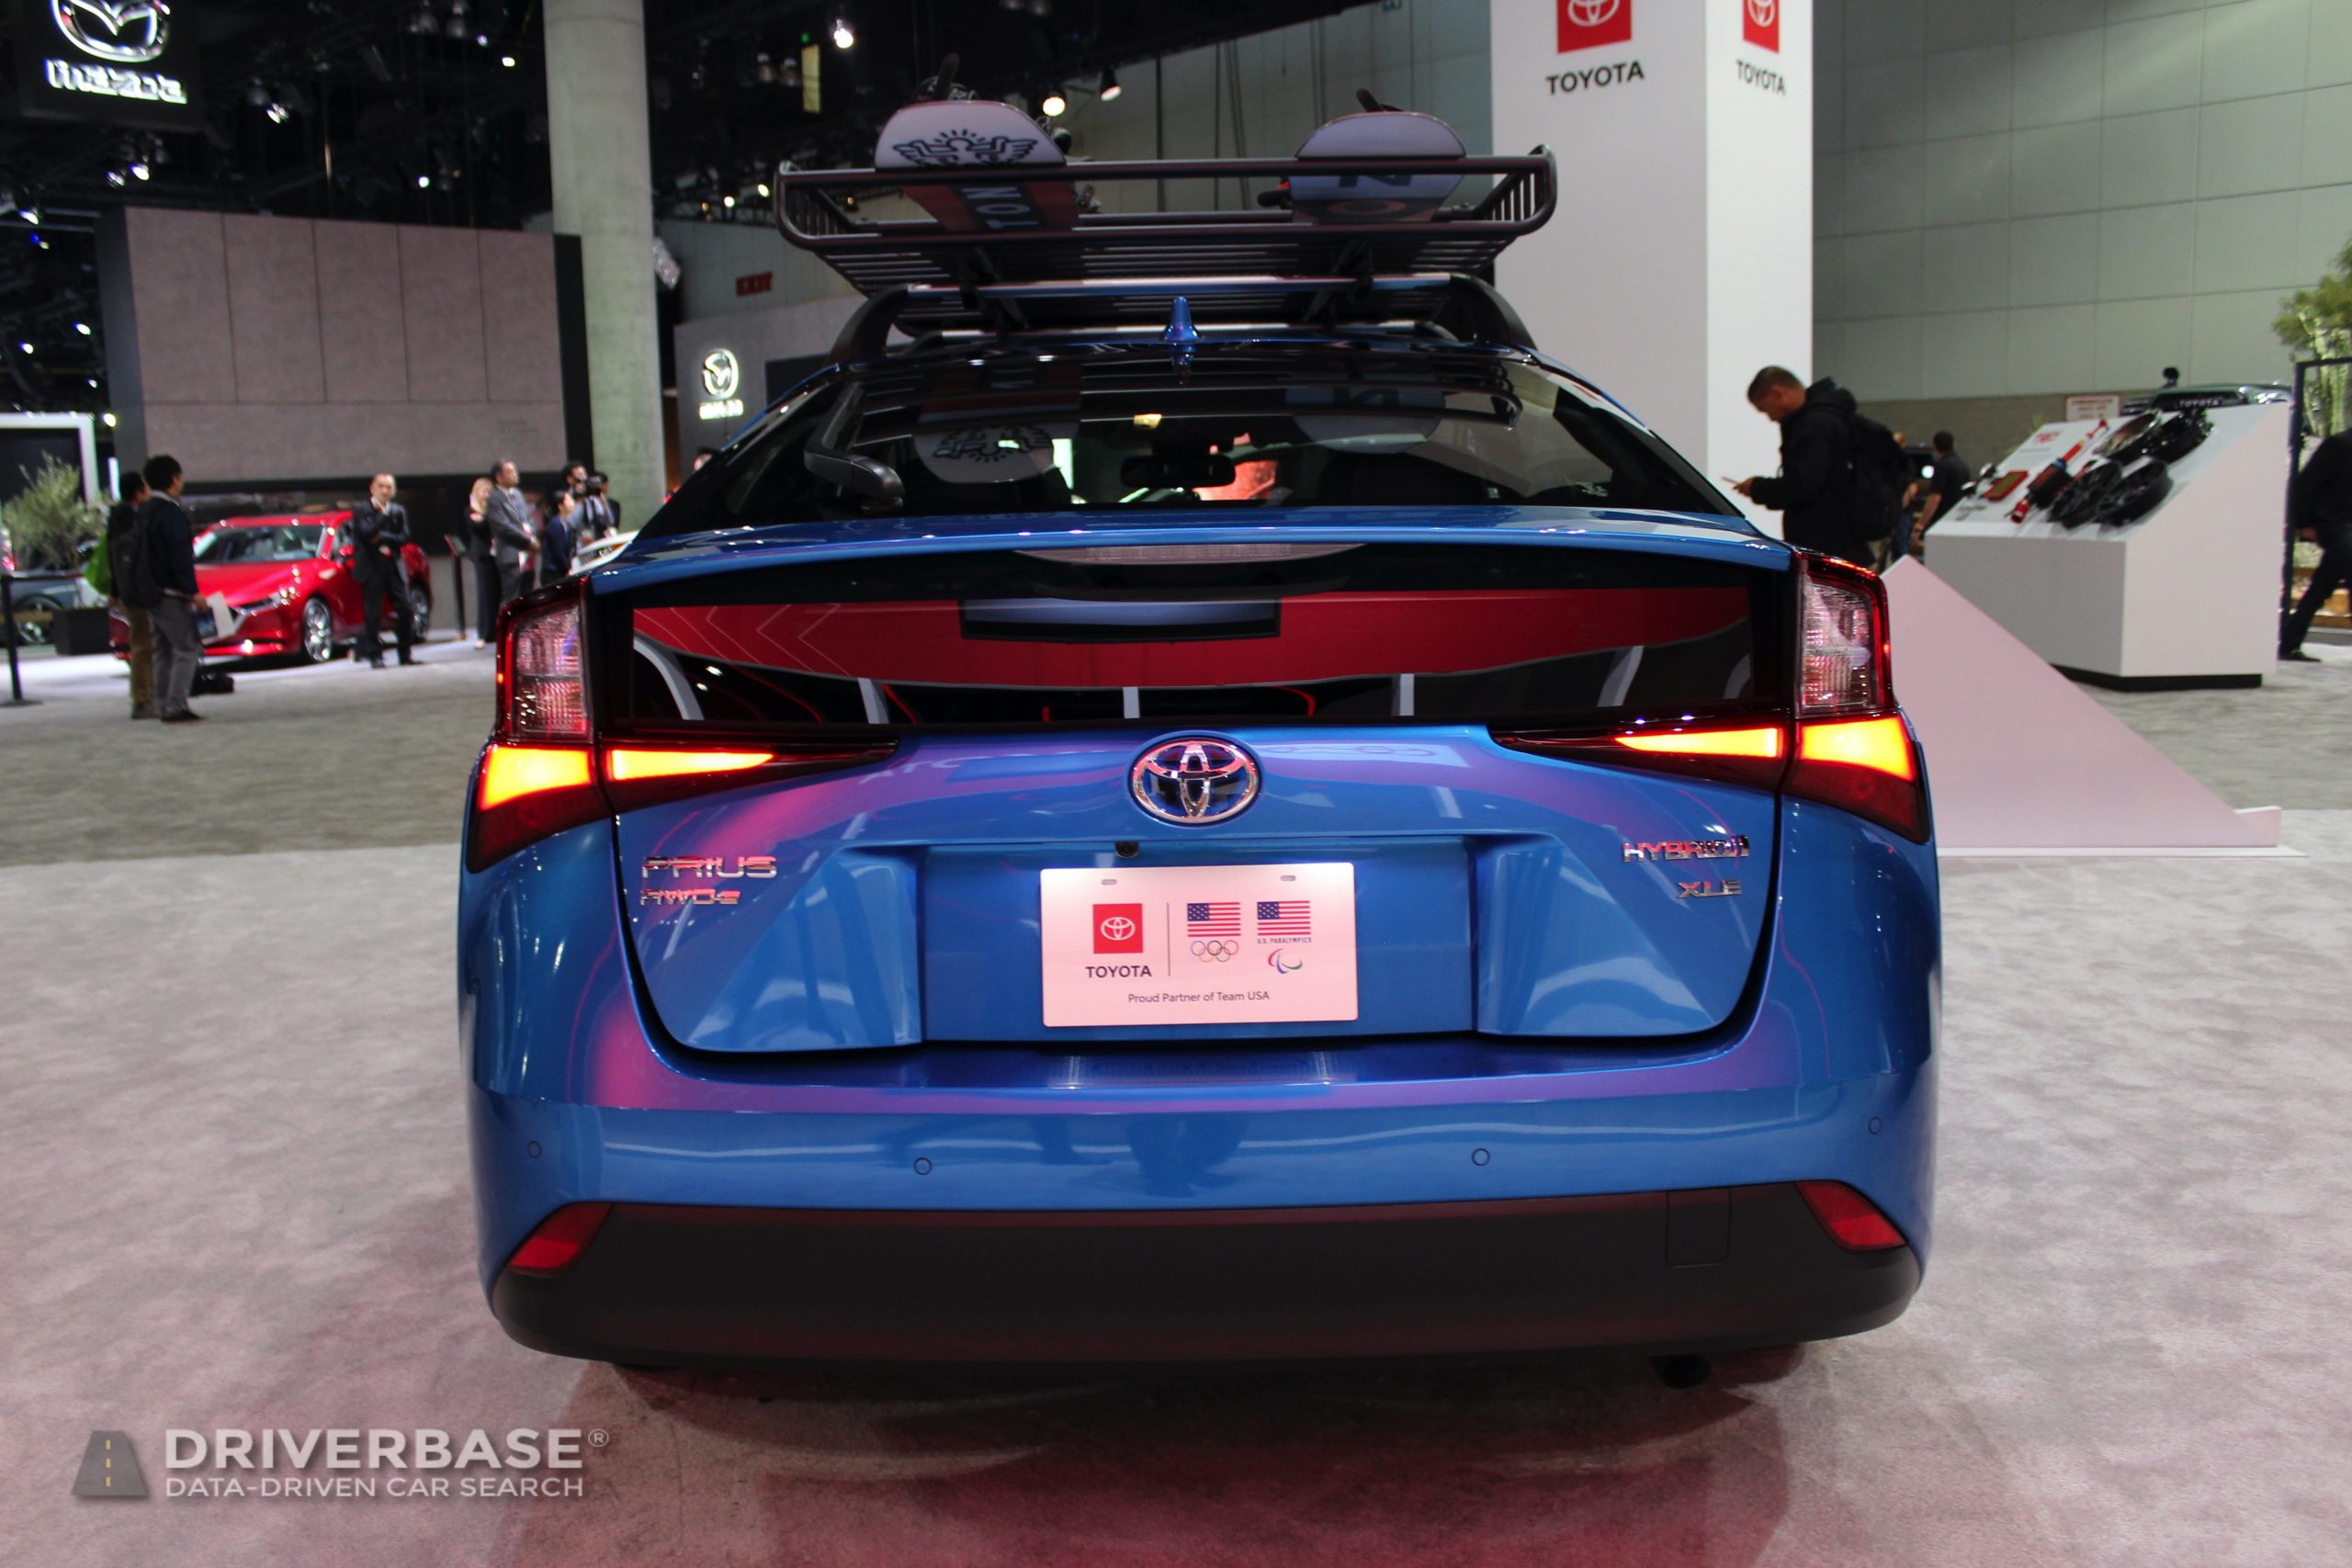 2020 Toyota Prius Hybrid All Wheel Drive at the 2019 Los Angeles Auto Show